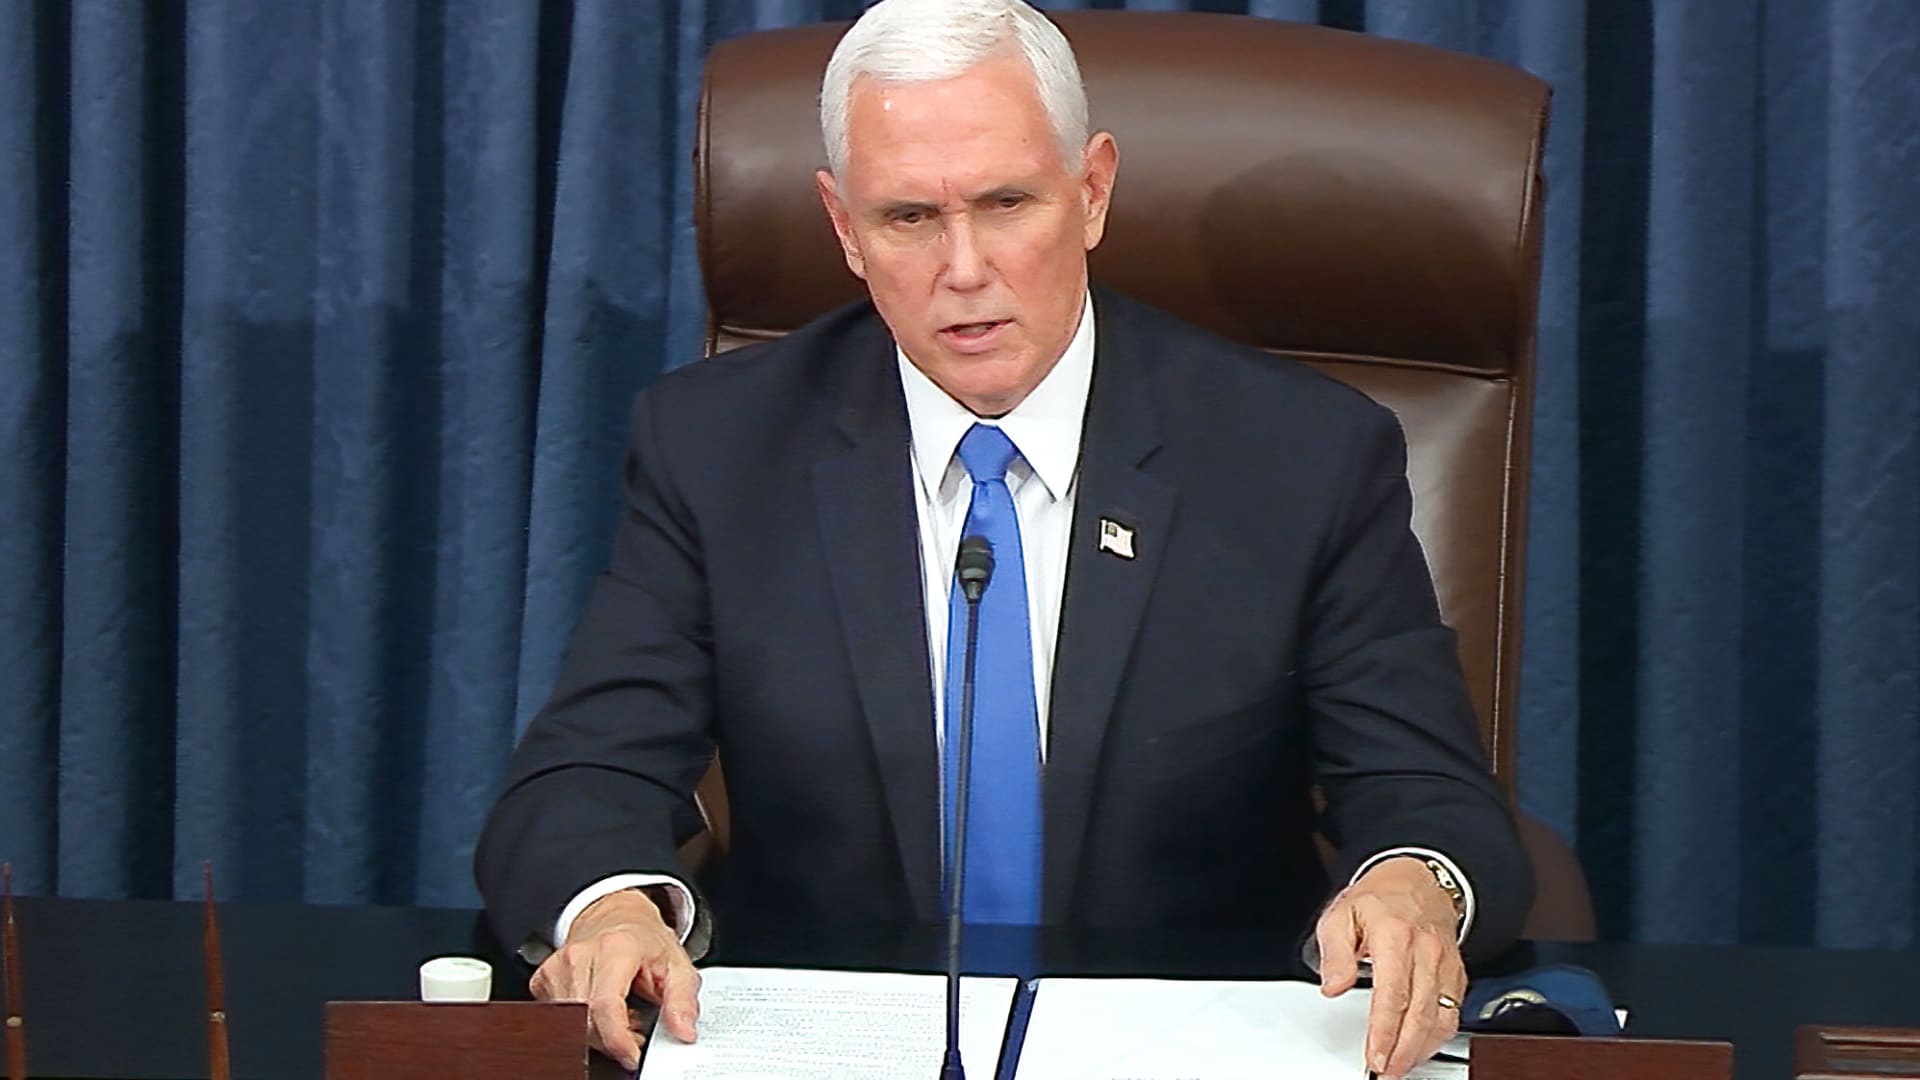 In this image from video, Vice President Mike Pence speaks as the Senate reconvenes after protesters stormed into the U.S. Capitol on Wednesday, Jan. 6, 2021.